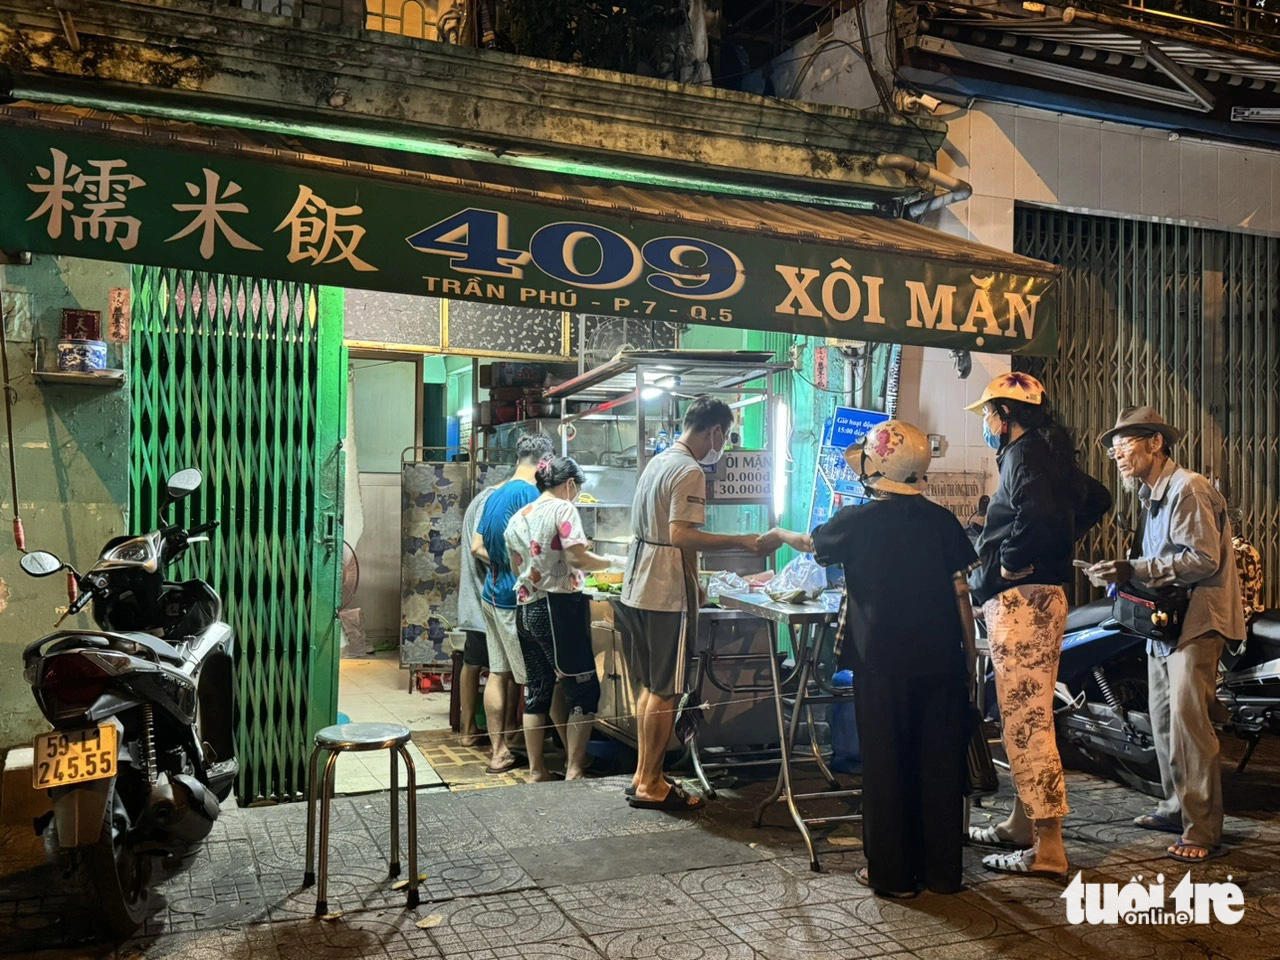 The renowned ‘Xôi Mặn’ (Savory Sticky Rice) 409 shop on Tran Phu Street in District 5, Ho Chi Minh City. Photo: Ho Lam / Tuoi Tre